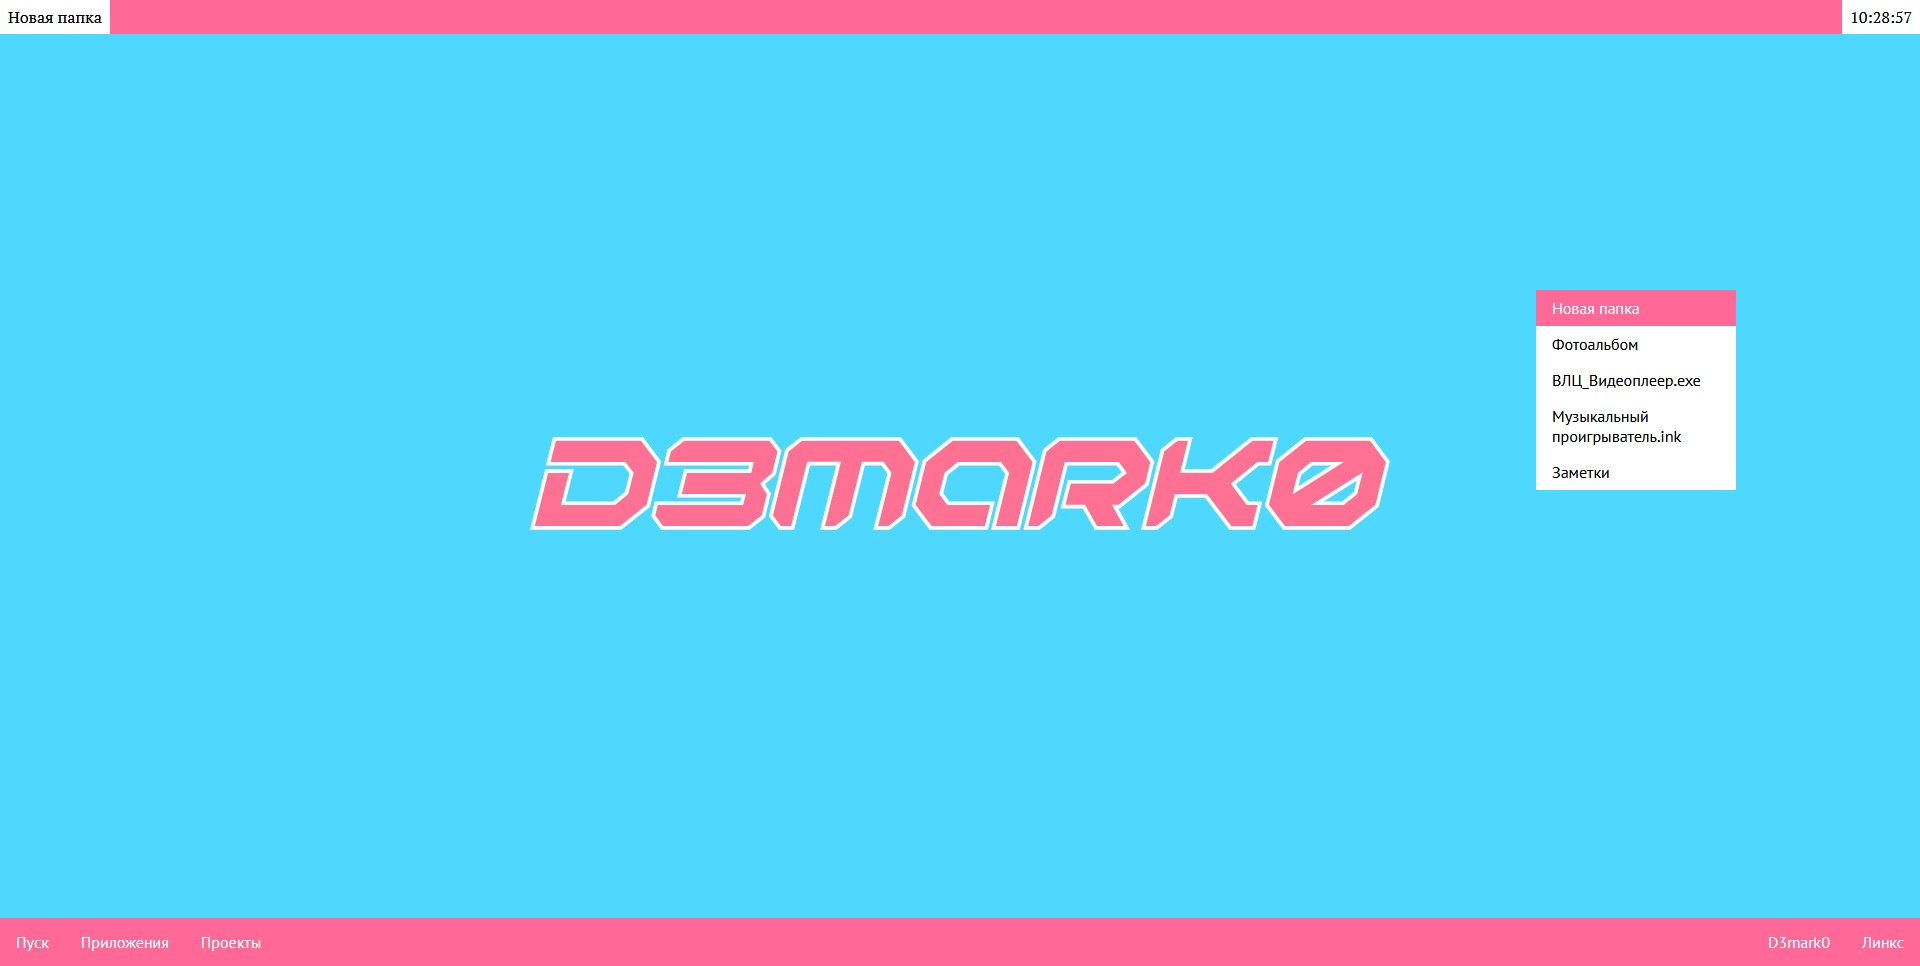 D3mark0 OS, 2019-ongoing. This project is meant to become a perfect artist portfolio with intricate interactive features